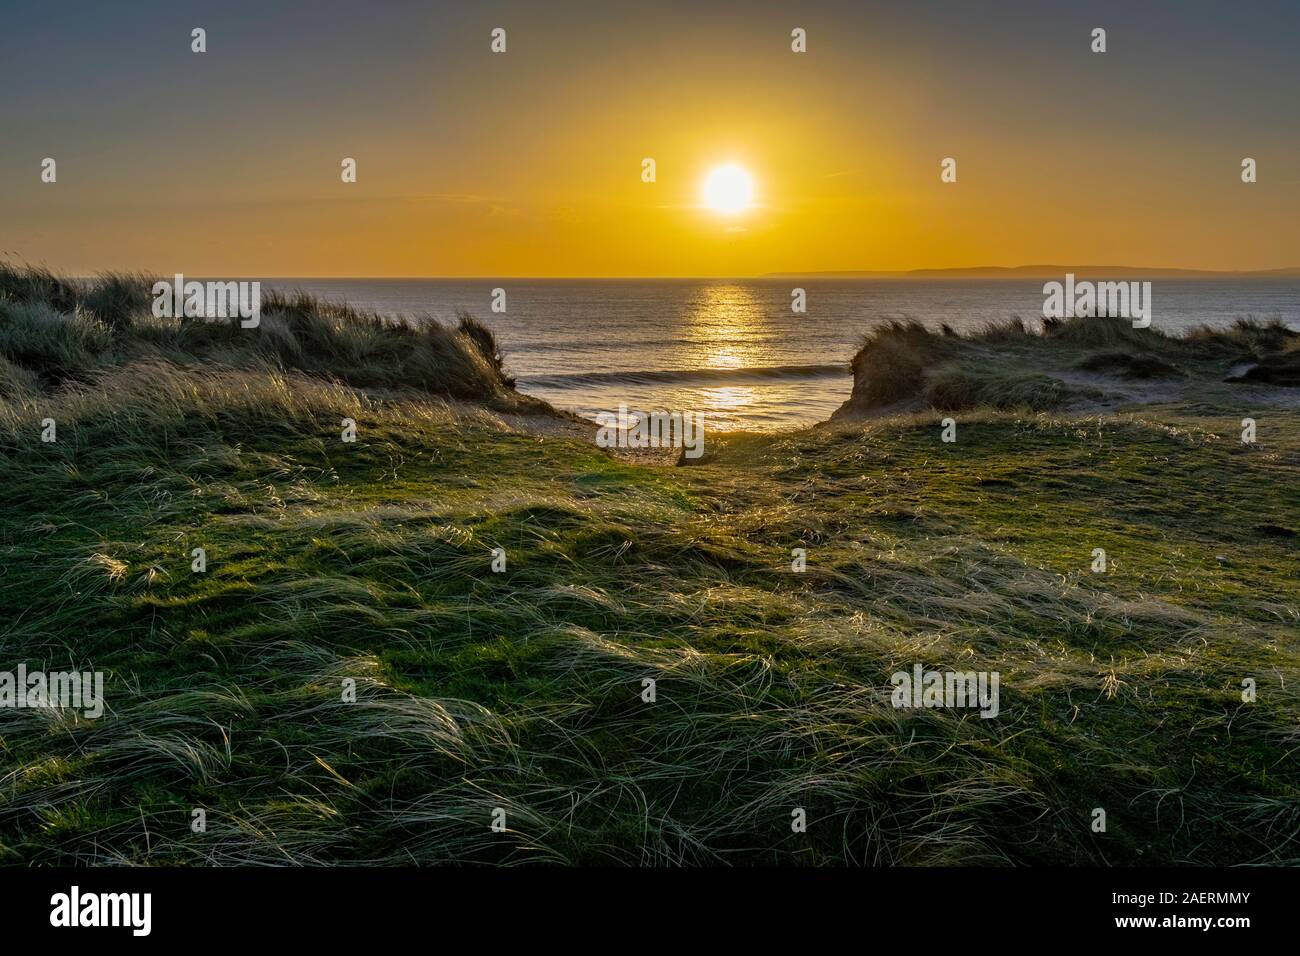 Sunset over the cliff tops of Hengistbury Head, Bournemouth with the tall coastal grasses being illuminated and reflection of the sun across the sea. Stock Photo